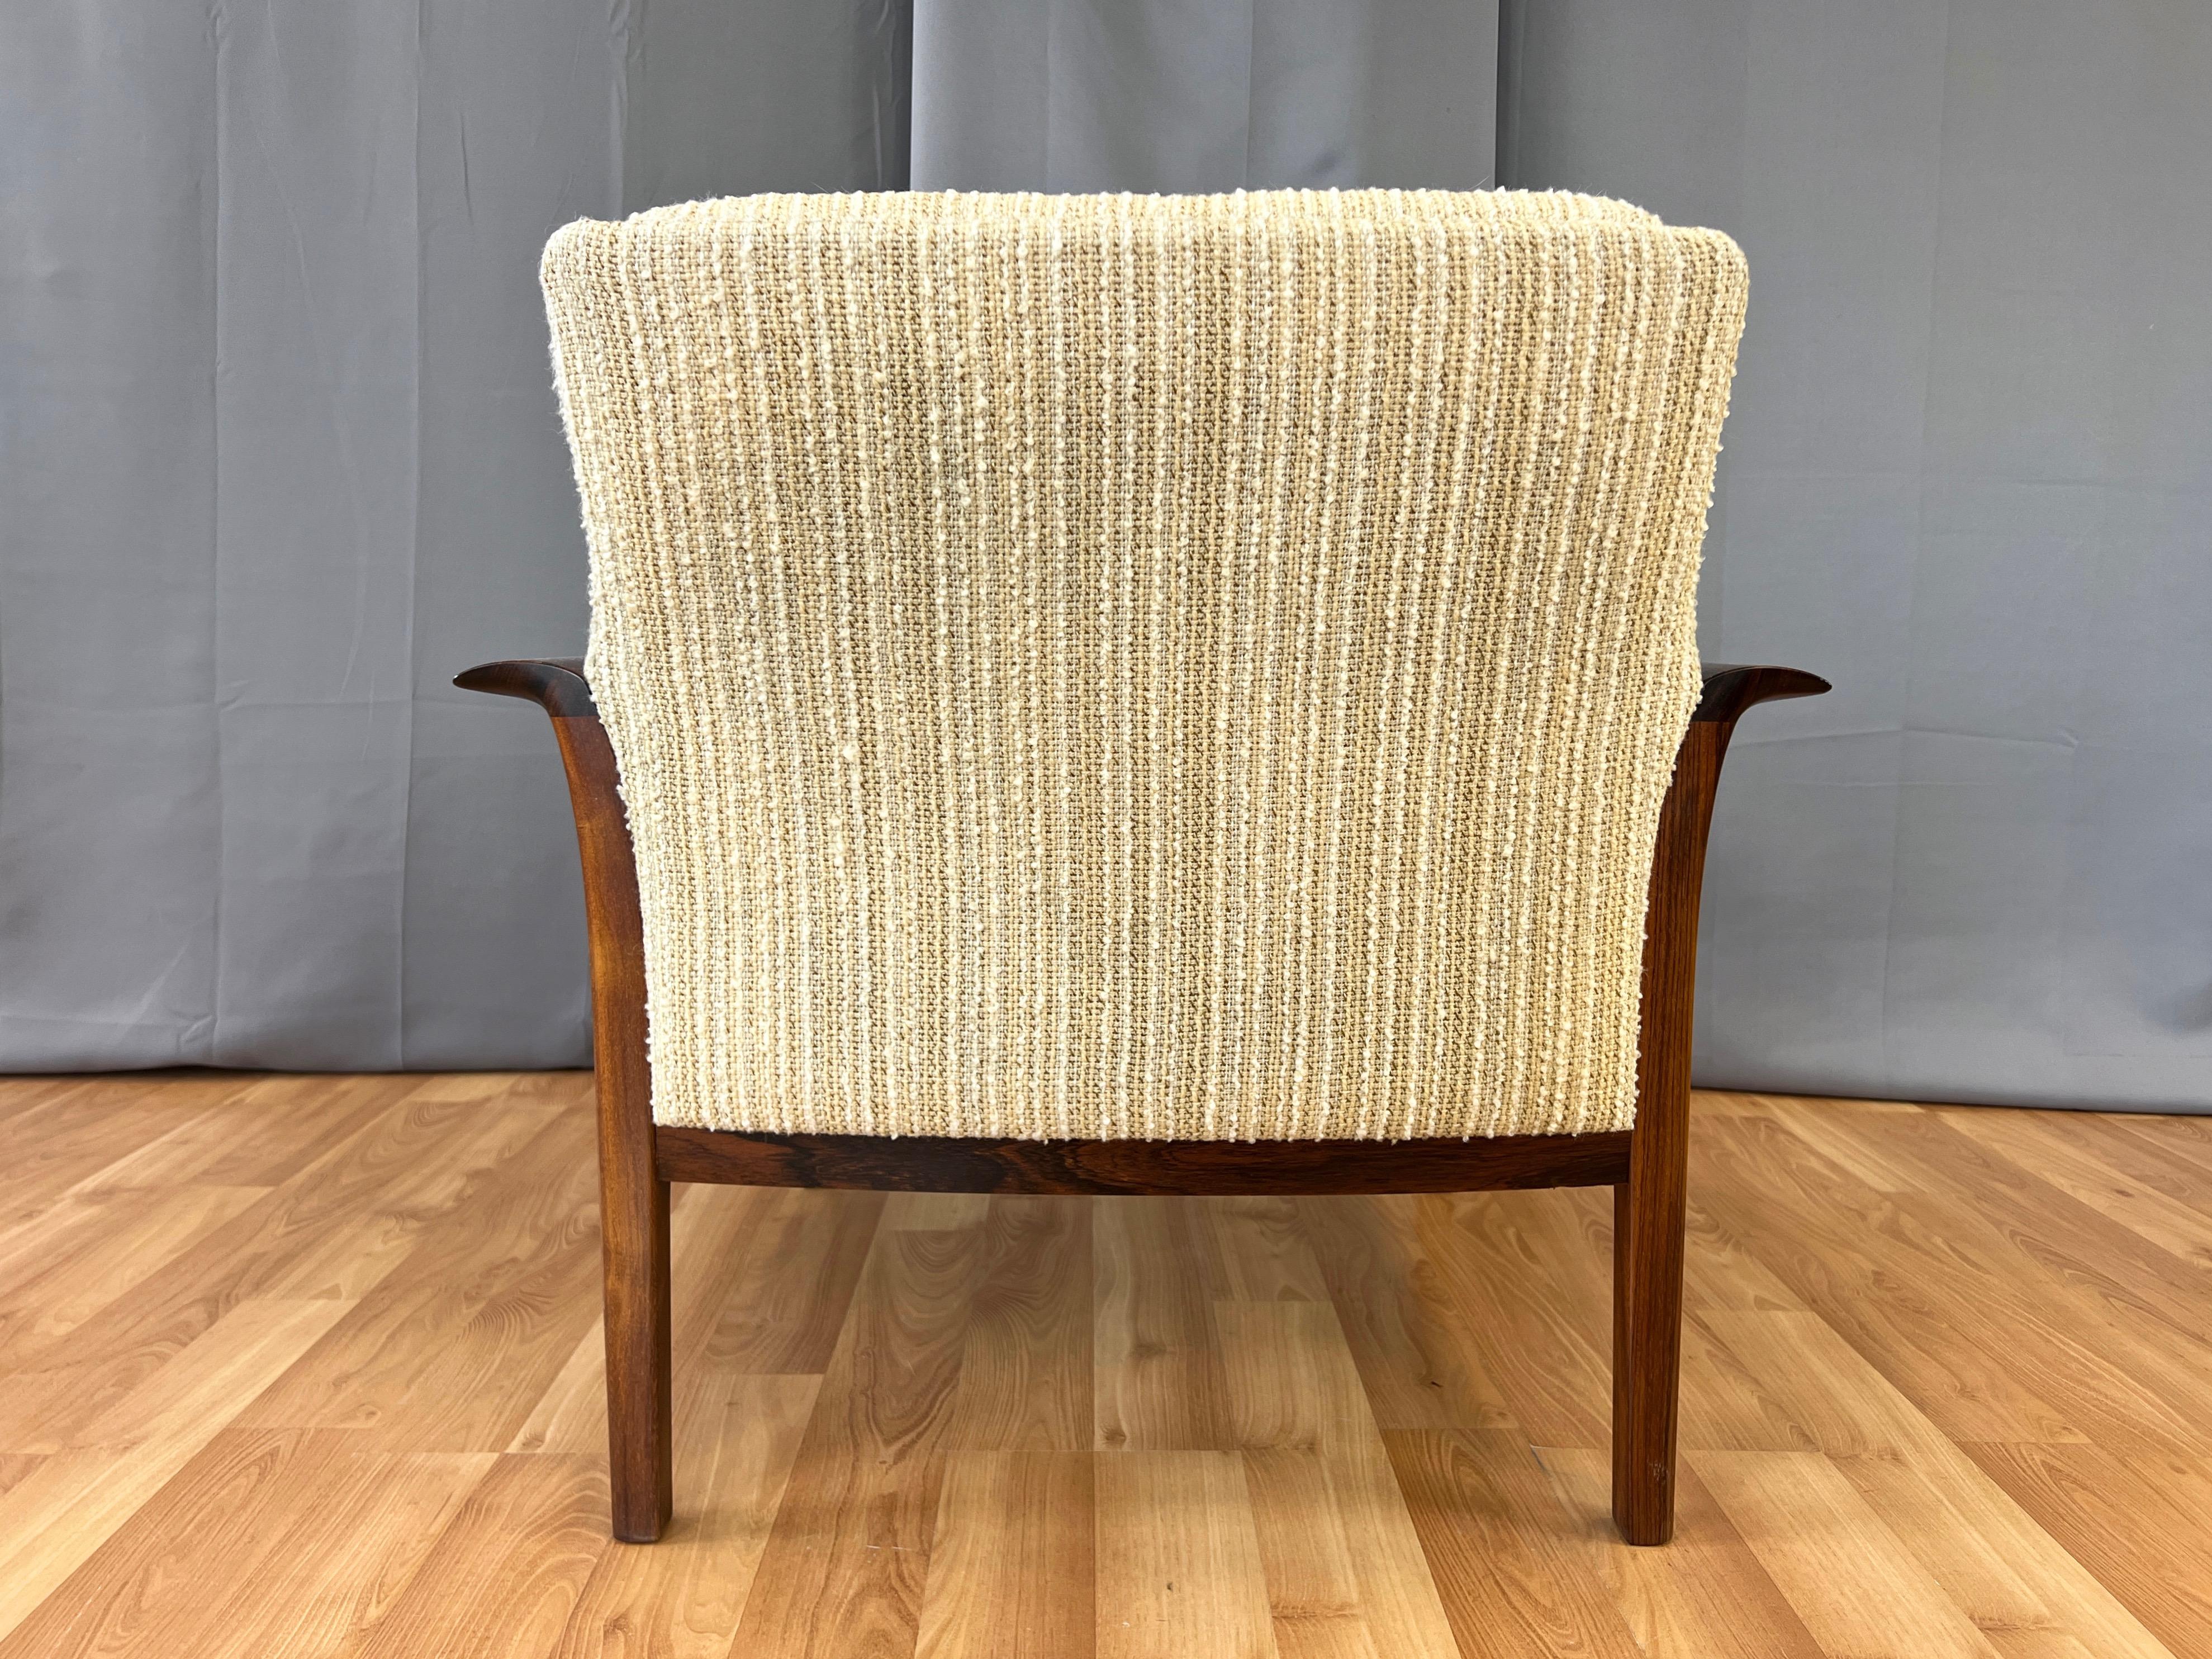 Late 20th Century Knut Sæter for Vatne Møbler Rosewood and Upholstery Lounge Chair, 1976 For Sale